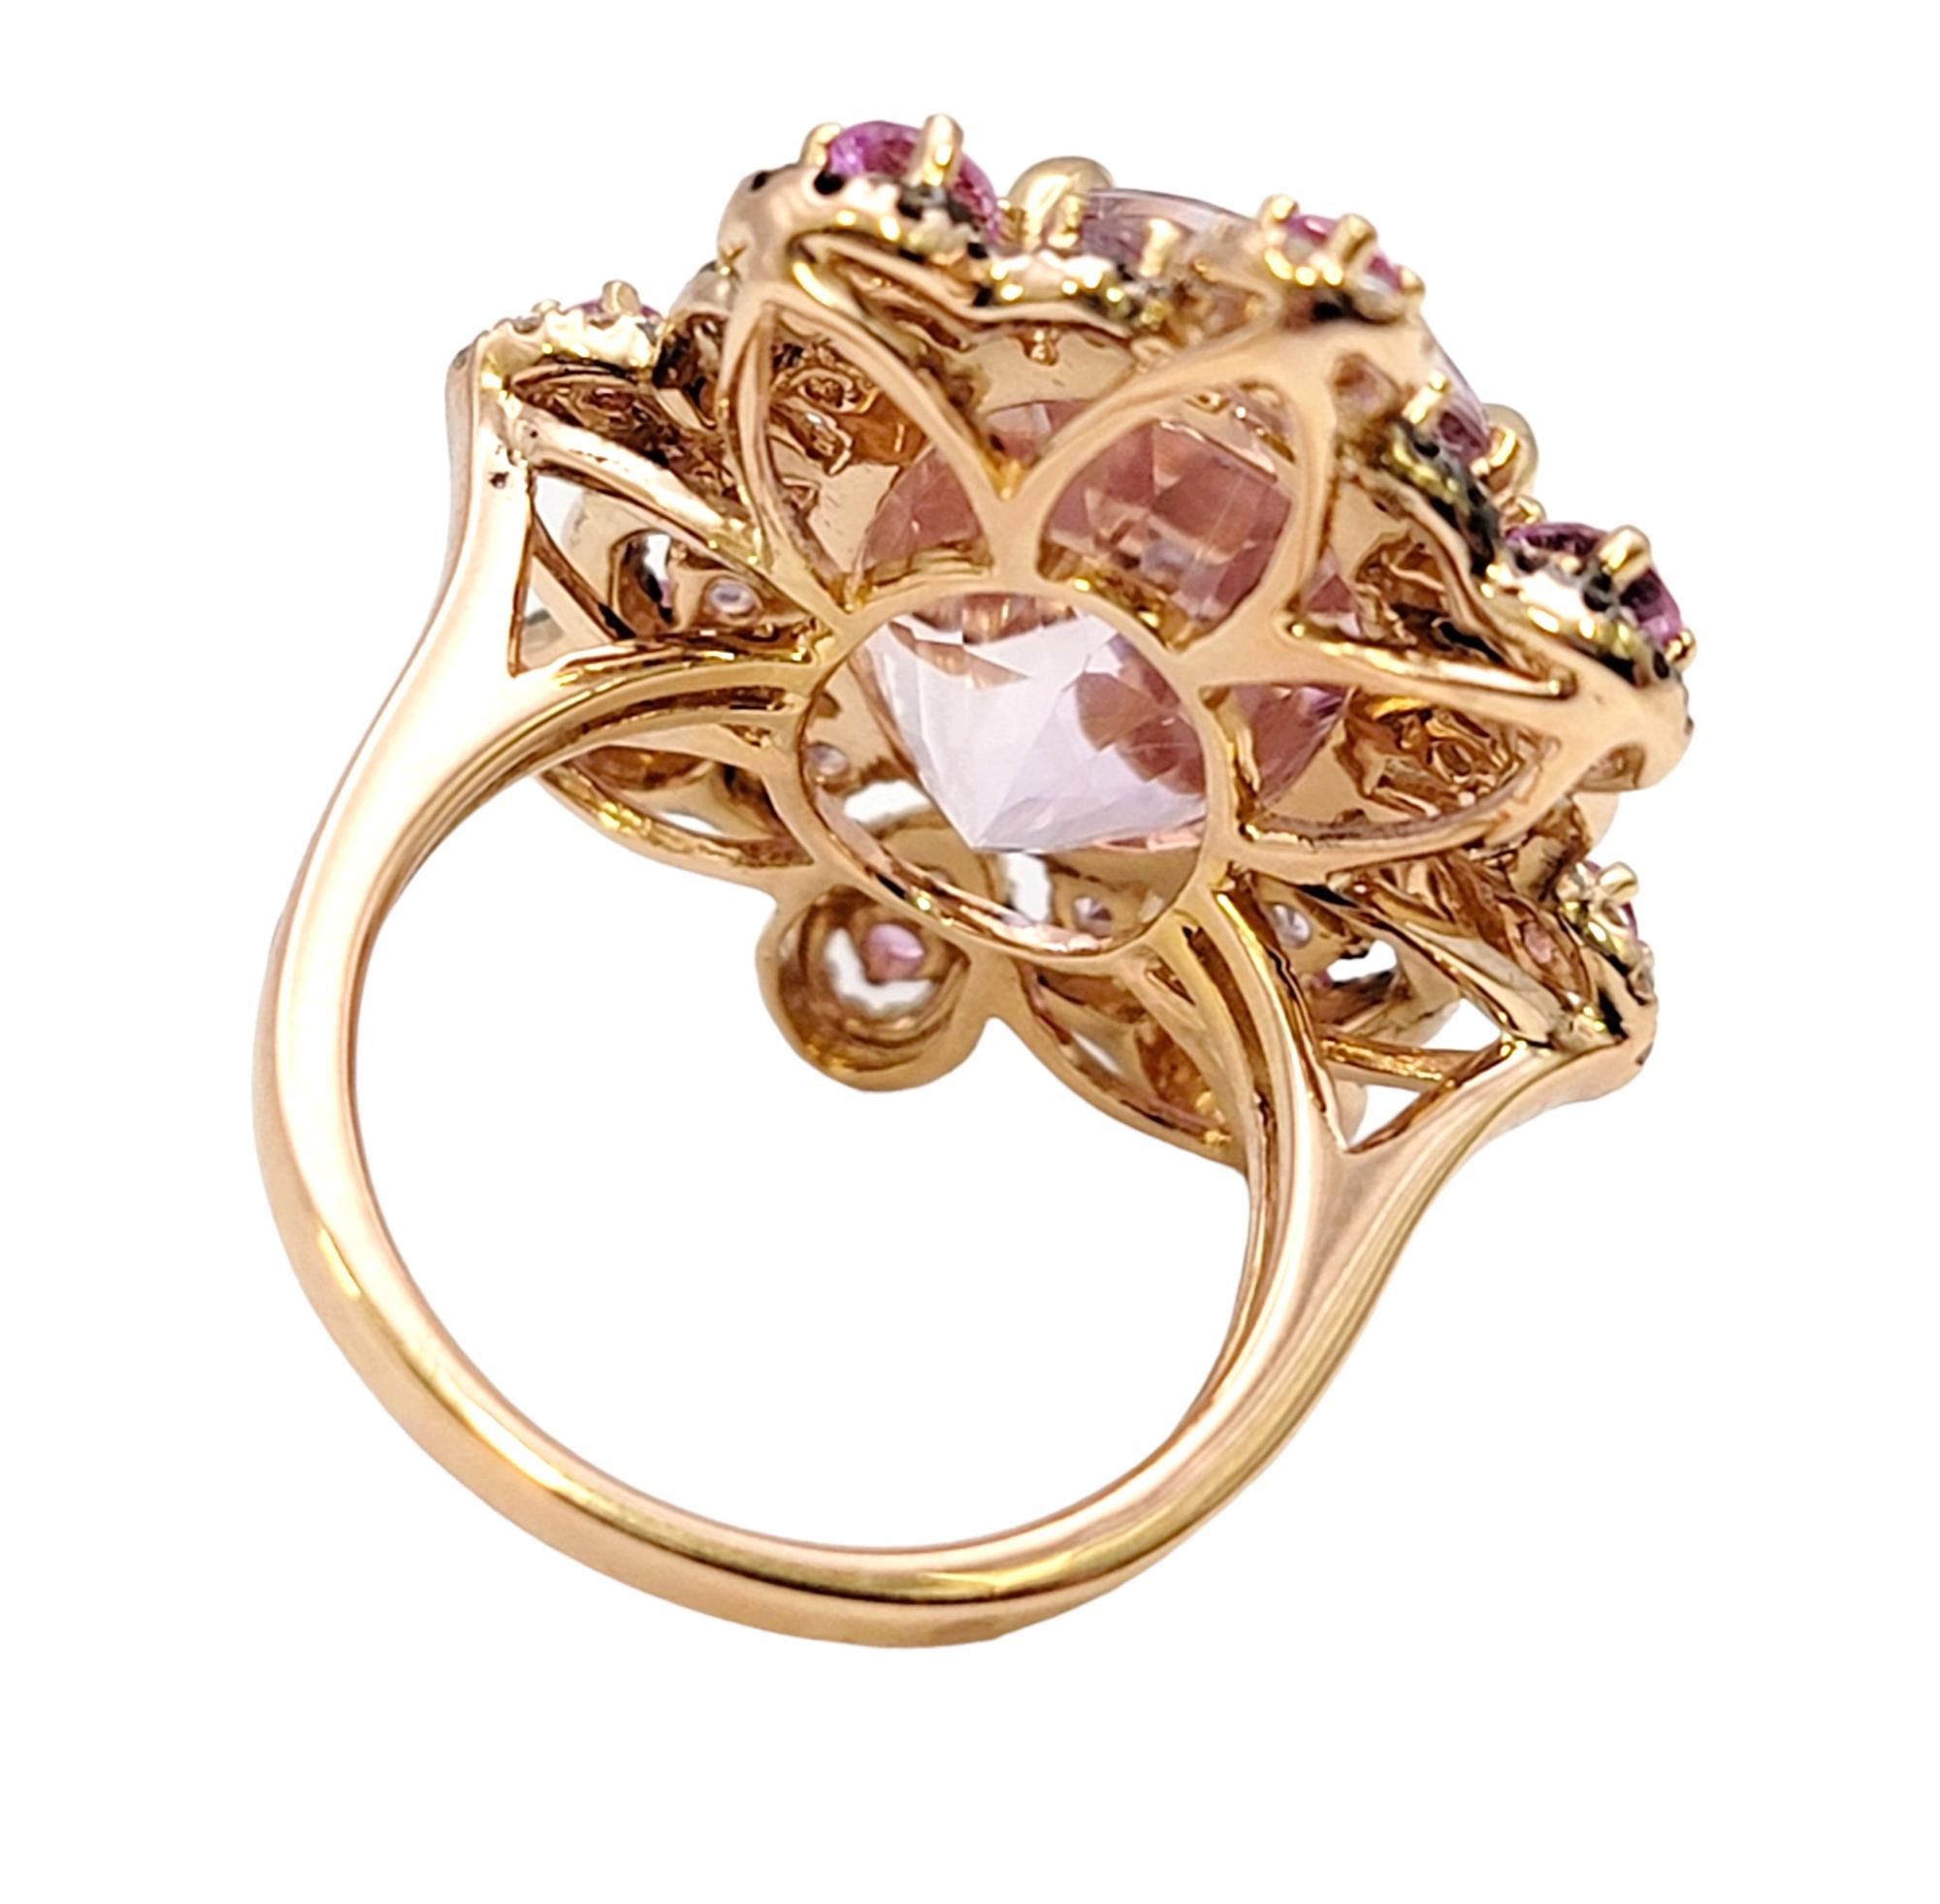 Rare Pink Topaz Cocktail Ring with Diamonds and Sapphires 18 Karat Rose Gold In Good Condition For Sale In Scottsdale, AZ